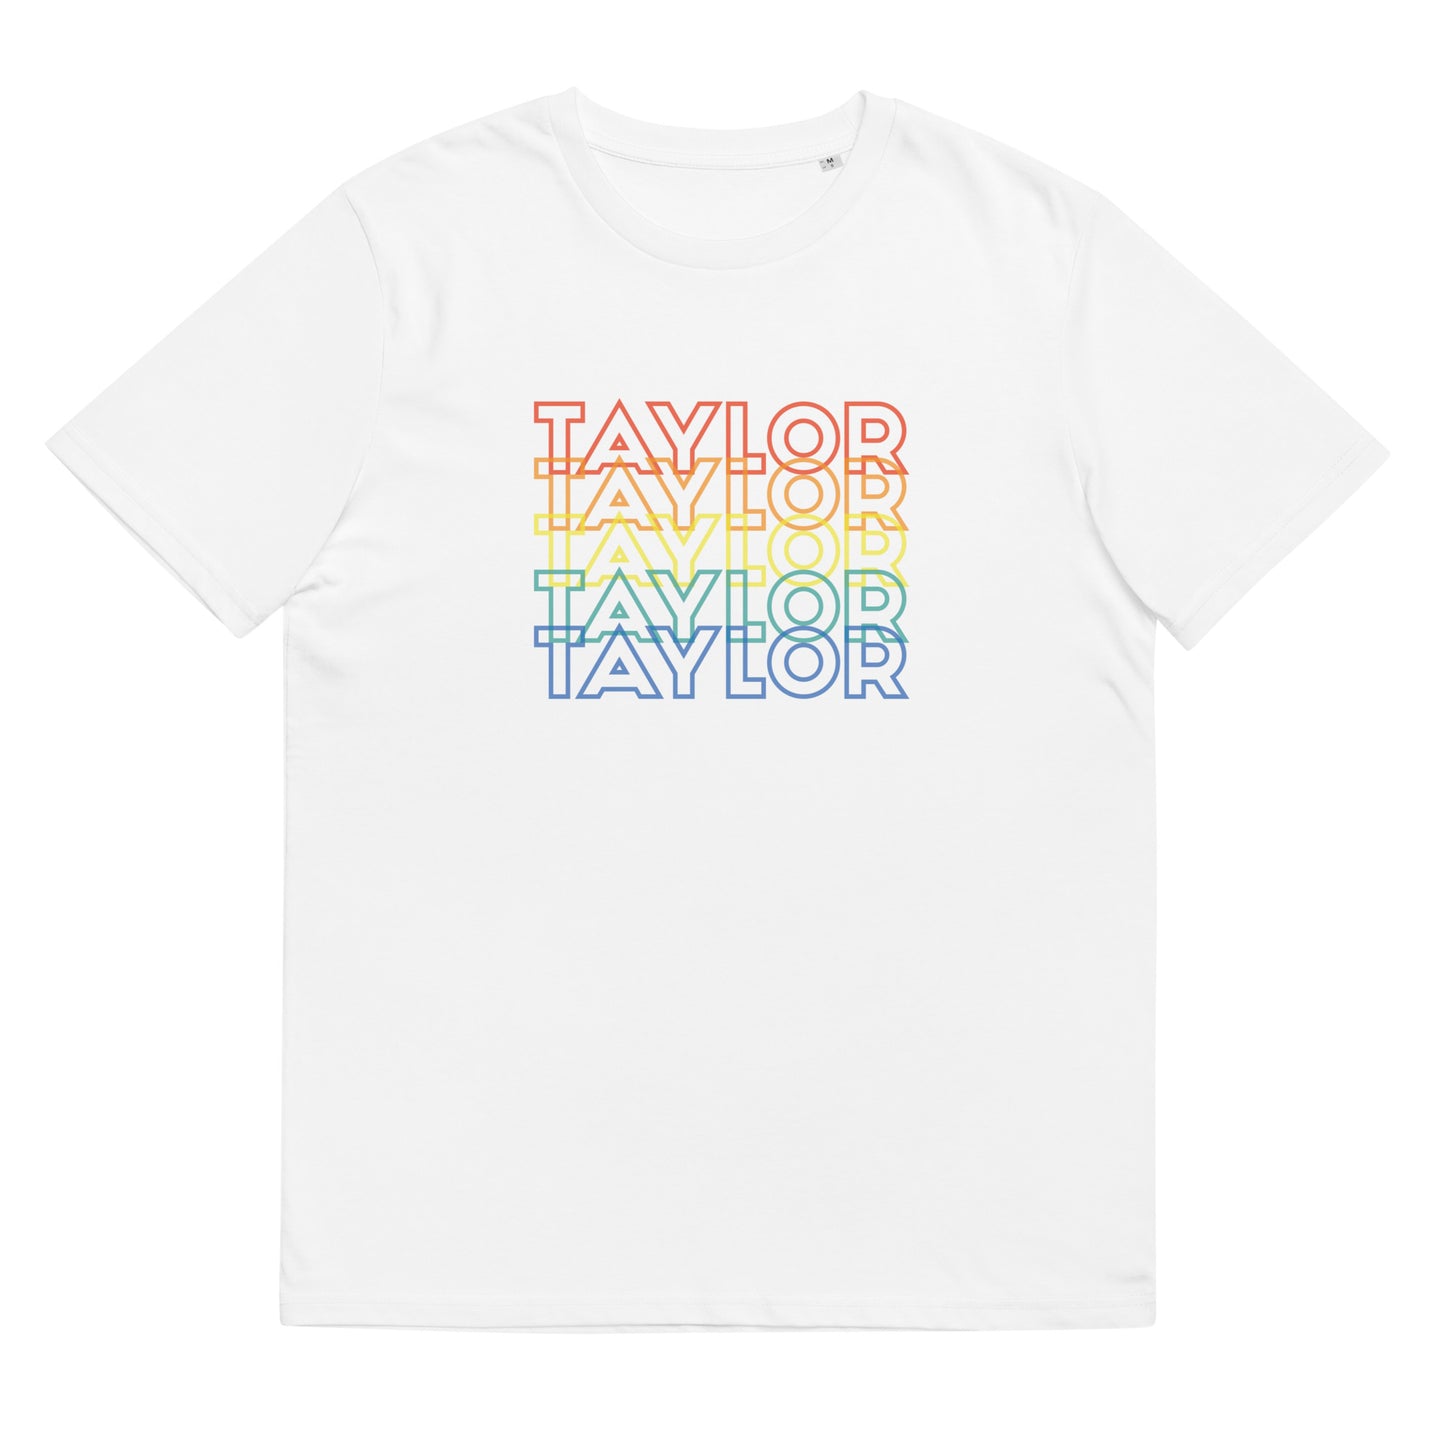 Taylor - Inspired By Taylor Swift - Sustainably Made Men’s Short Sleeve Tee